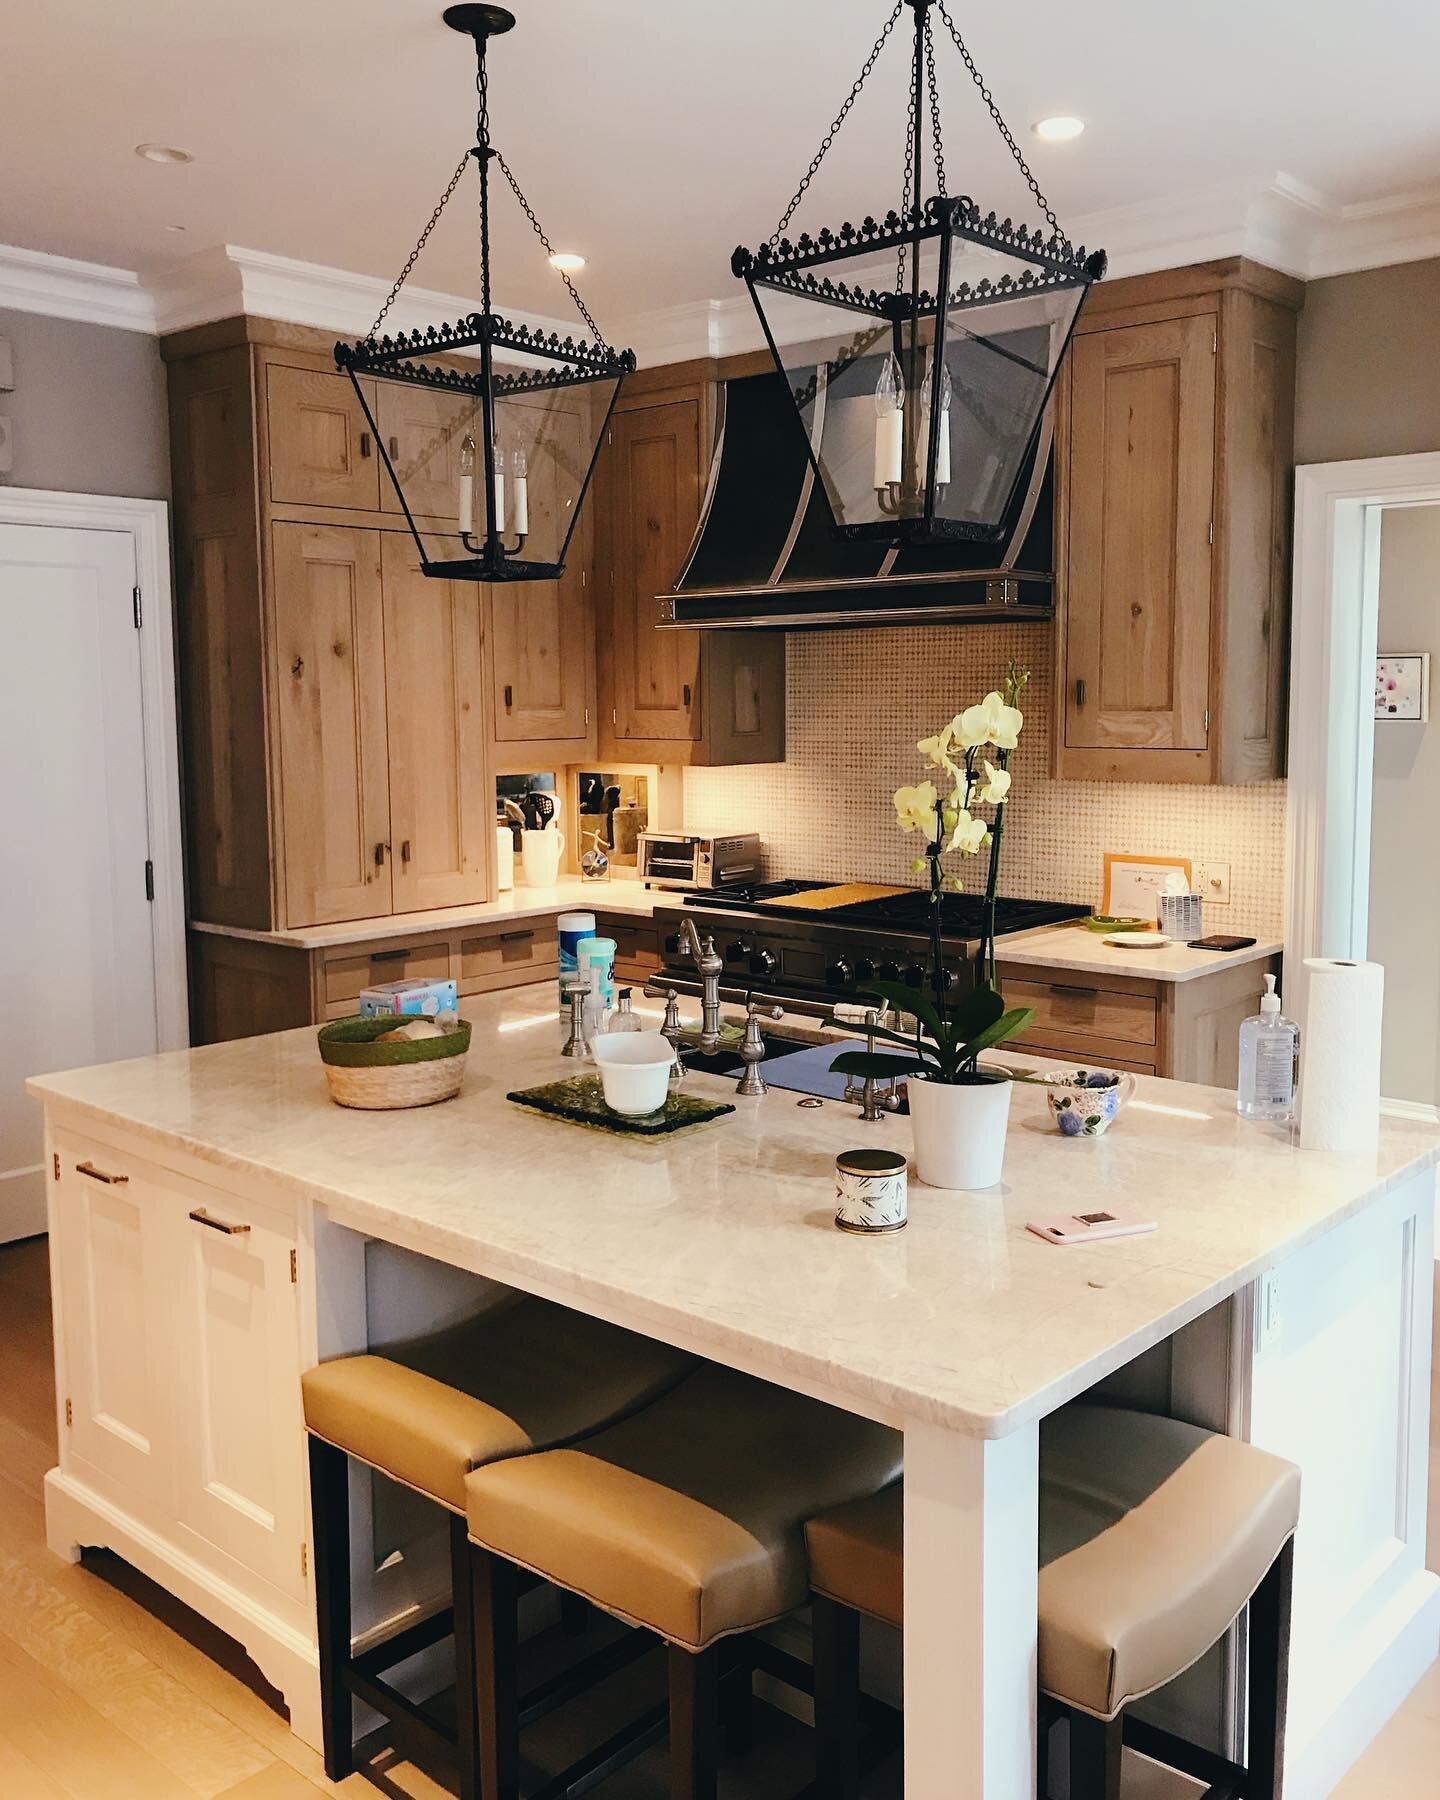 We loved working on these kitchen cabinets with @obrienharriscabinetry swipe to see before!
.
.
.
.
.
.
.
.
.
.
.
.
#chicago #generalcontractors #generalcontractorchicago #customcabinets #interiordesign